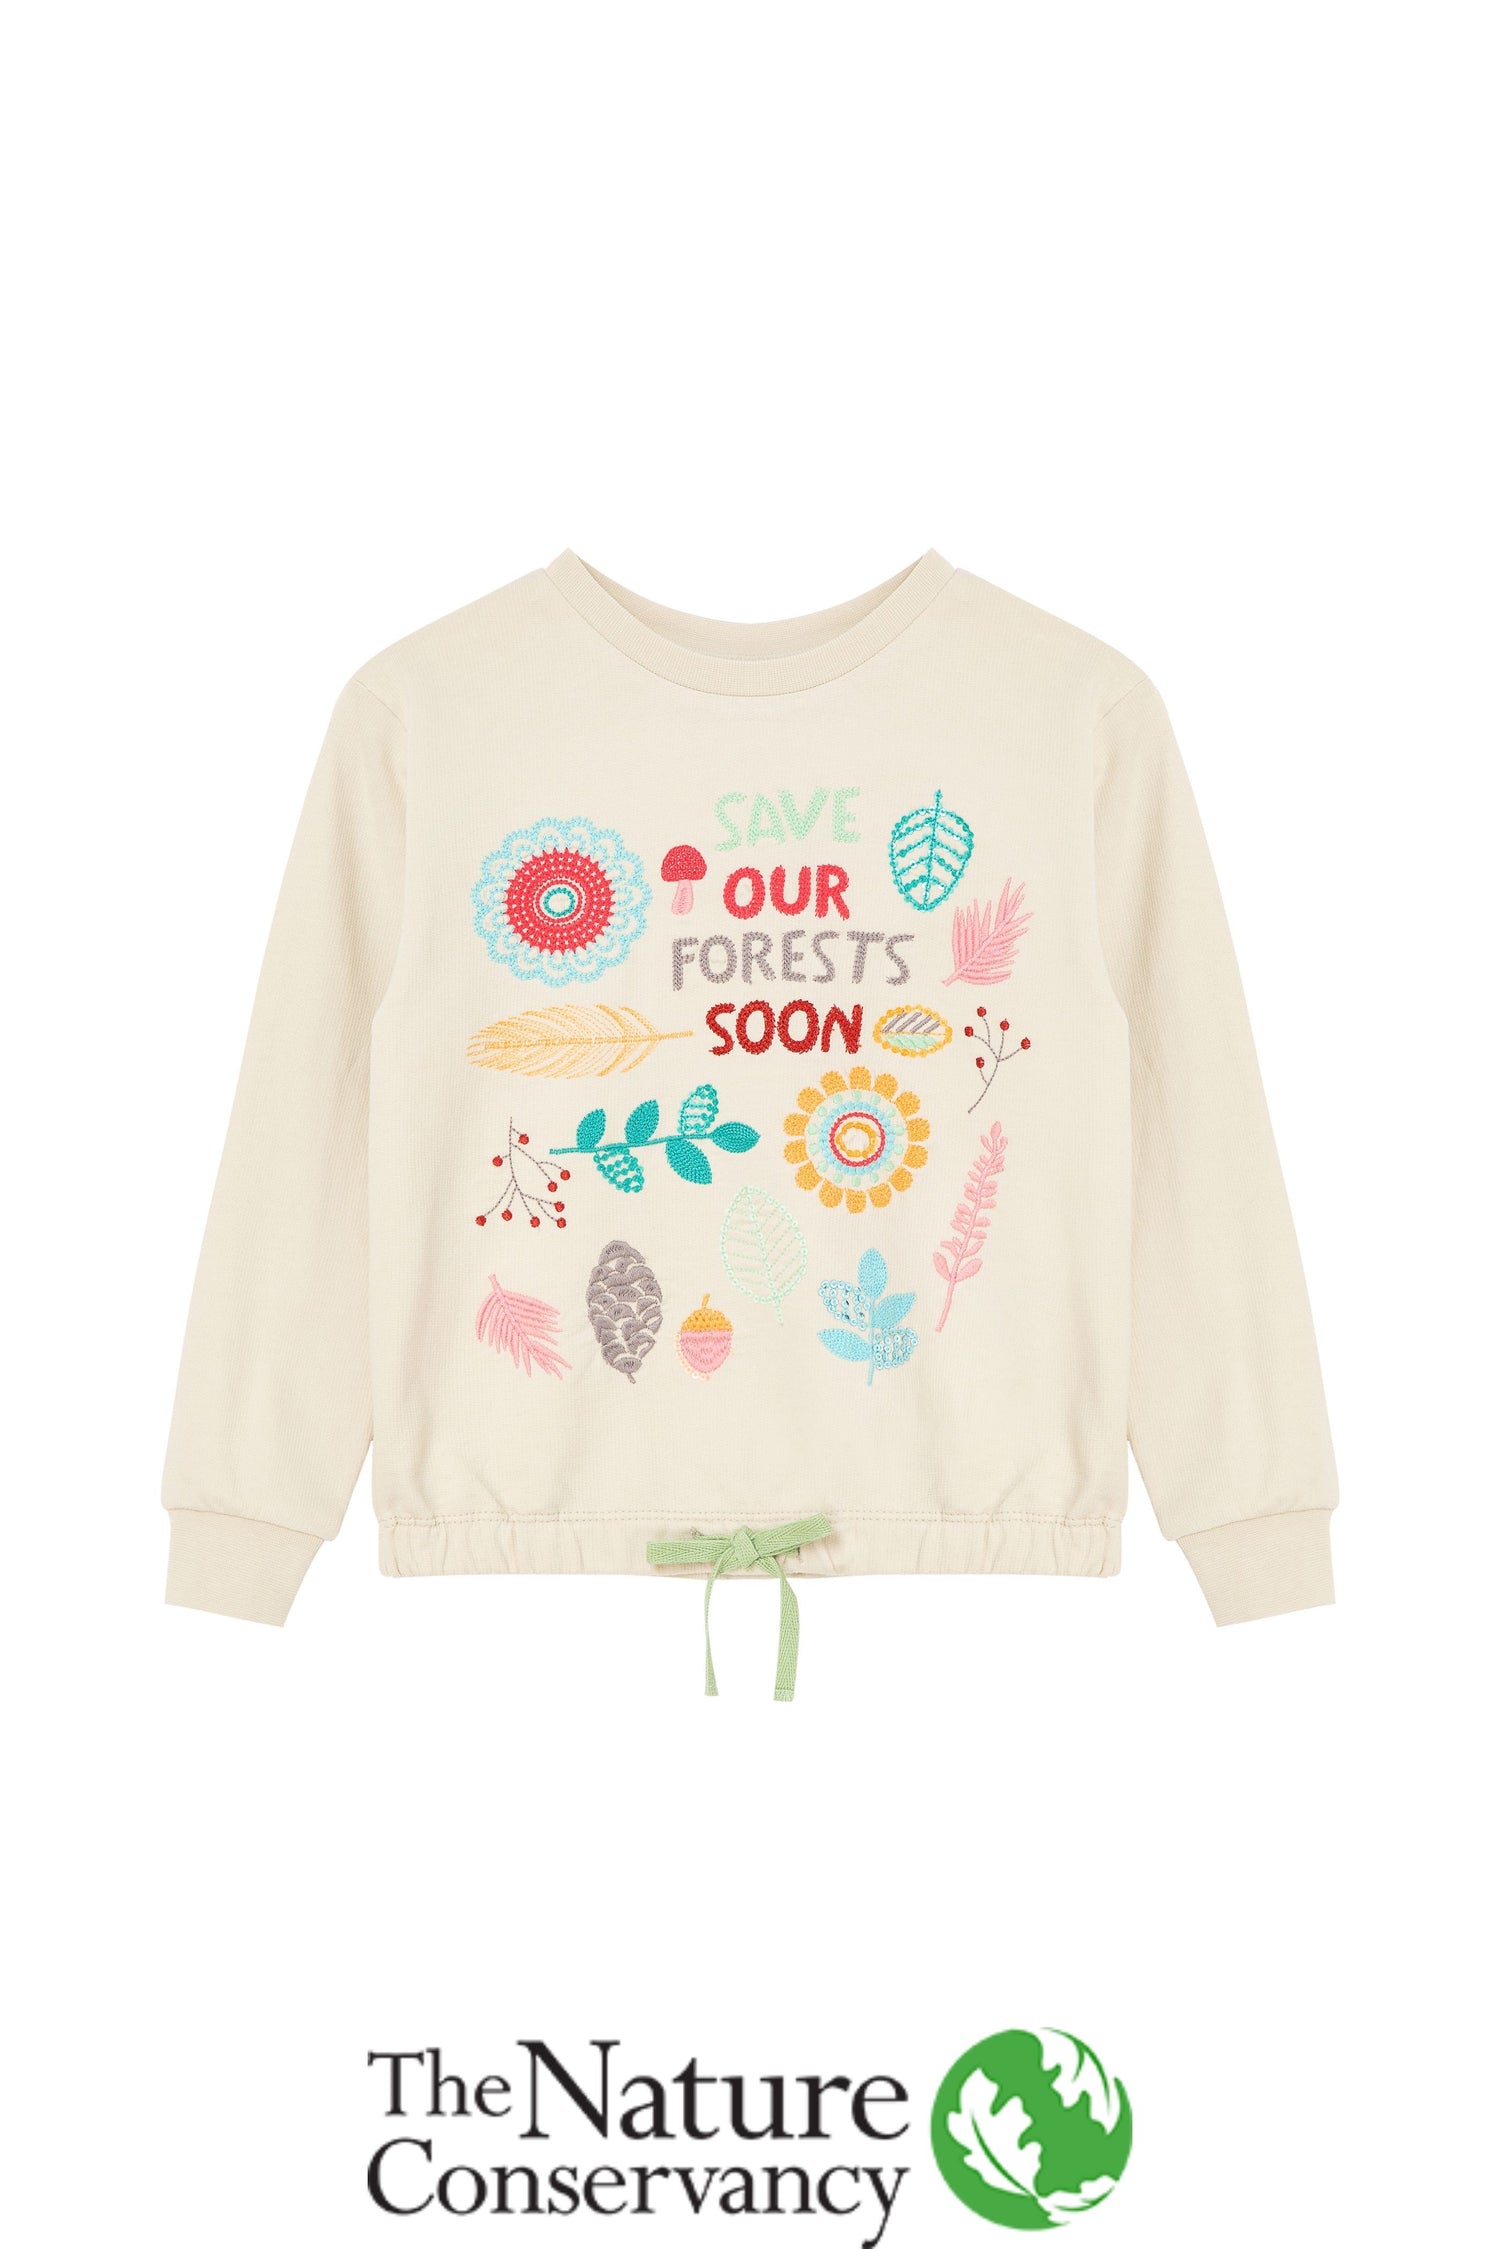 White sweatshirt with various foliage stitching and multi-colored 'save our forests soon' text